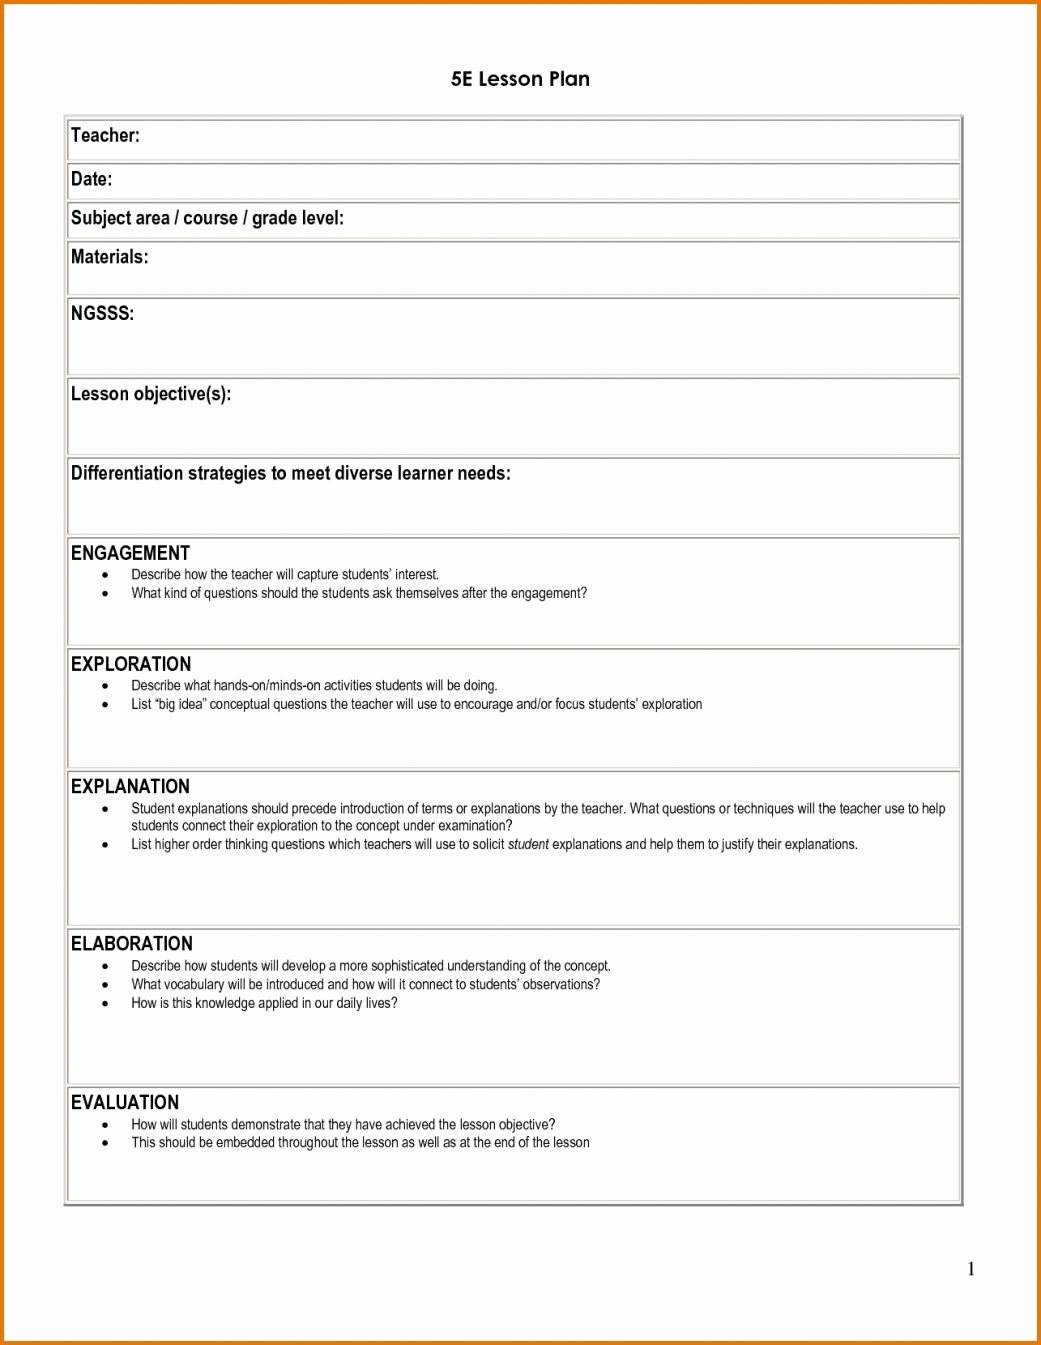 Ngss Lesson Plan Template Best Of 5 E Lesson Plan Template Classroom